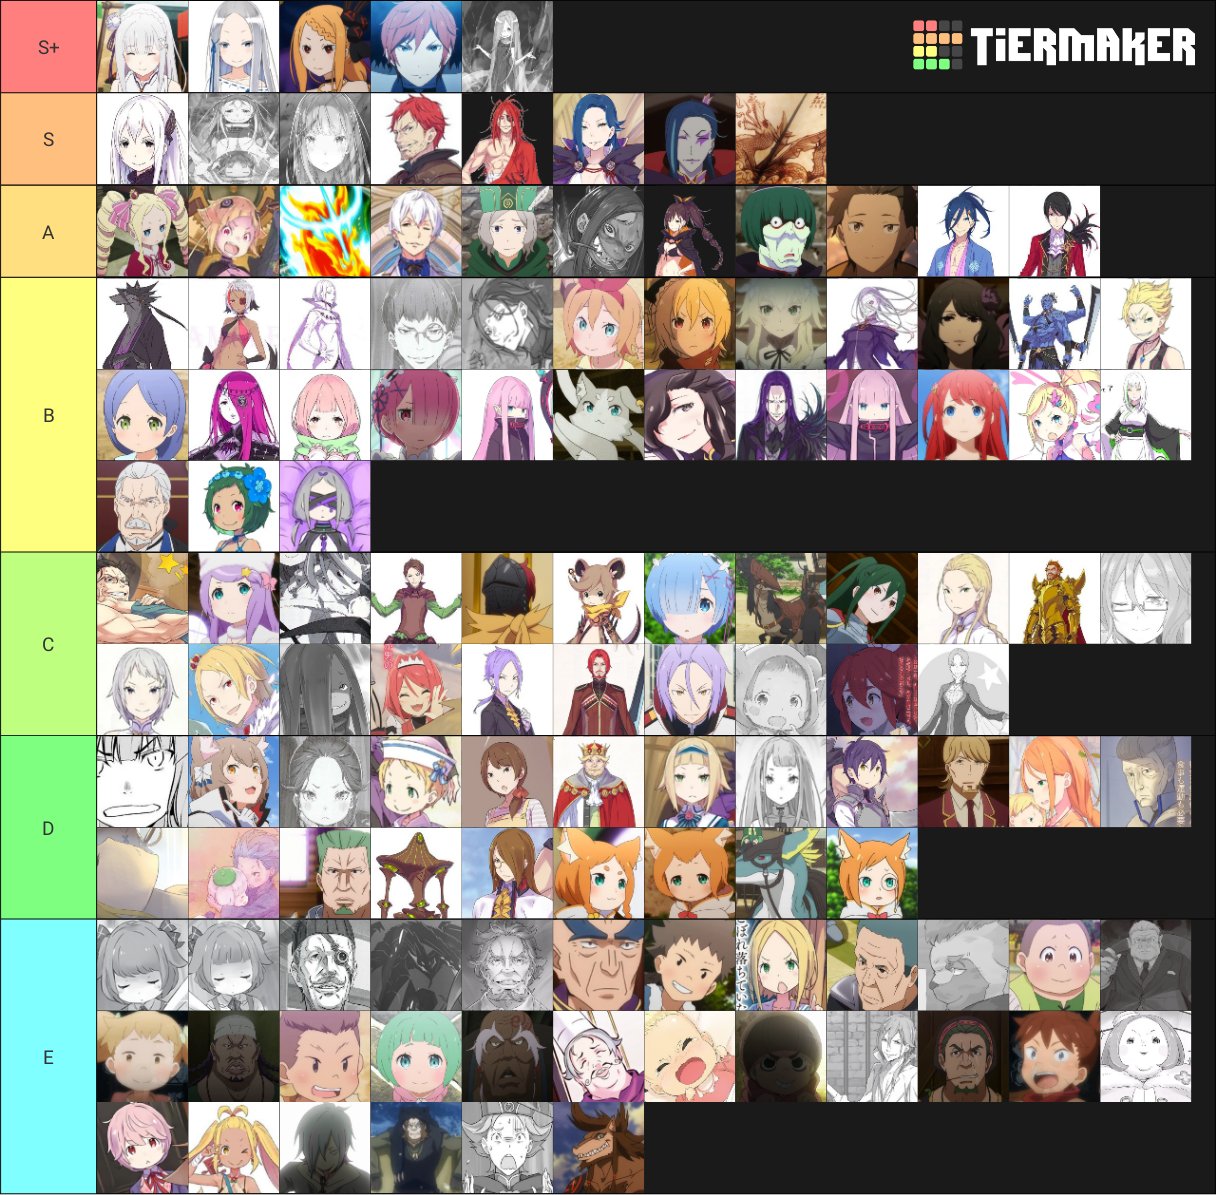 Re:Zero ー Every Main Character, Ranked By Likability